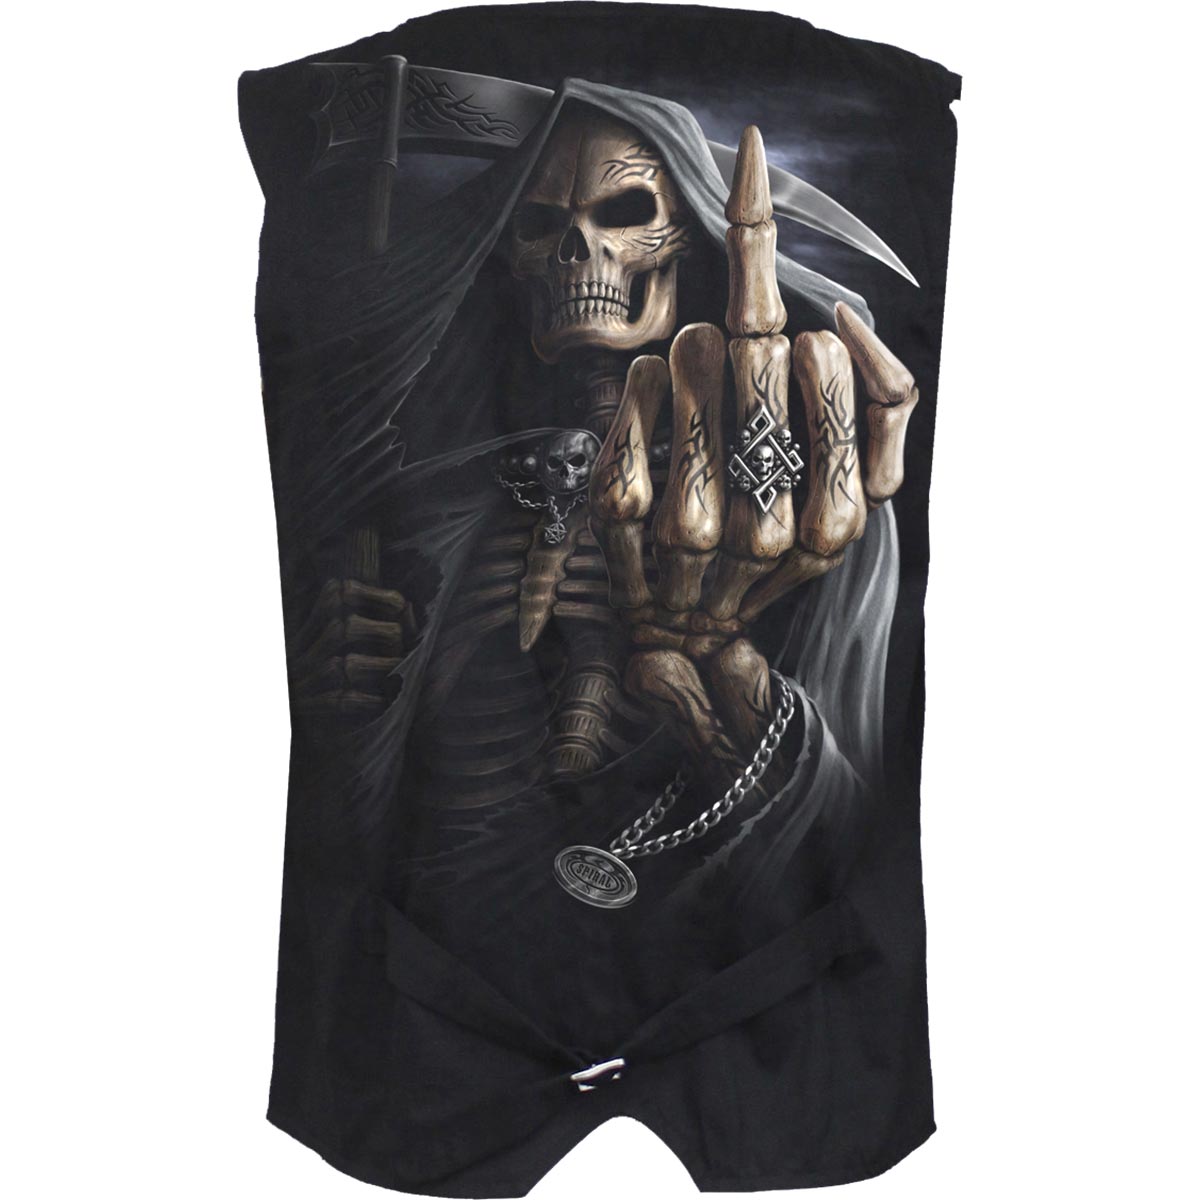 BONE FINGER - Gothic Waistcoat Four Button with Lining